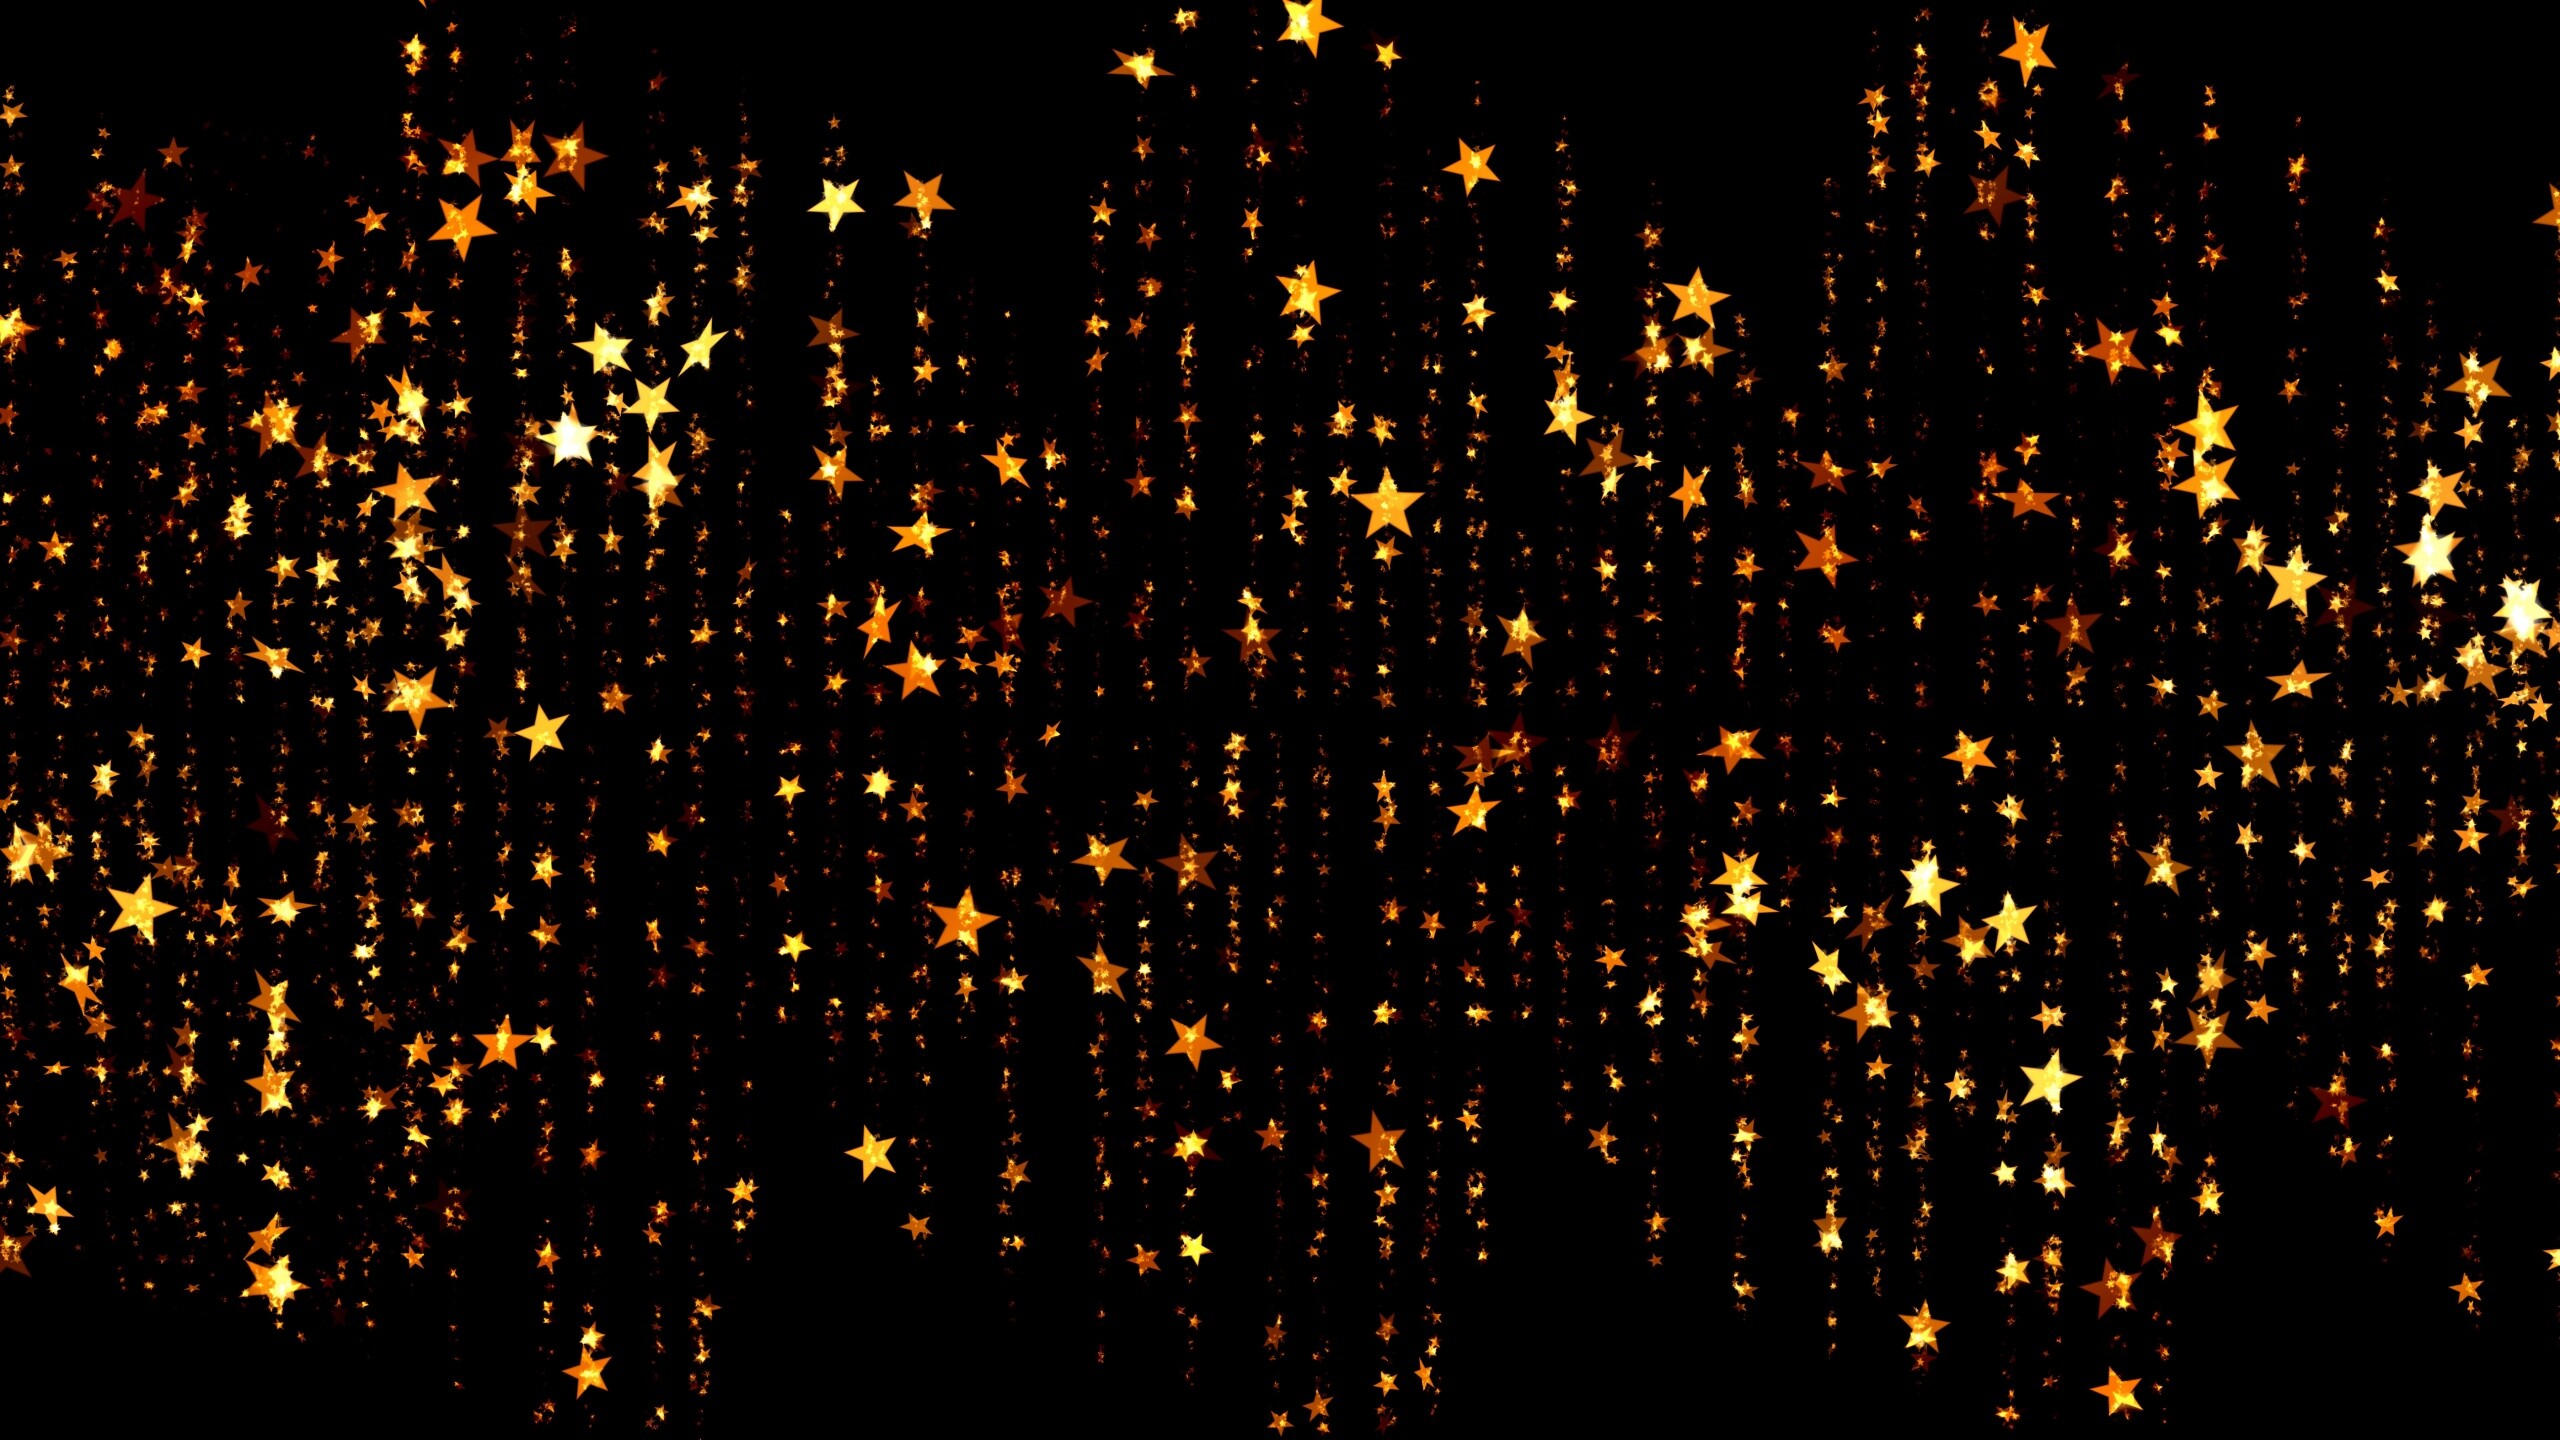 Gold Star: Abstract falling stars, Sparkling golden objects, Christmas curtain decor. 2560x1440 HD Background.